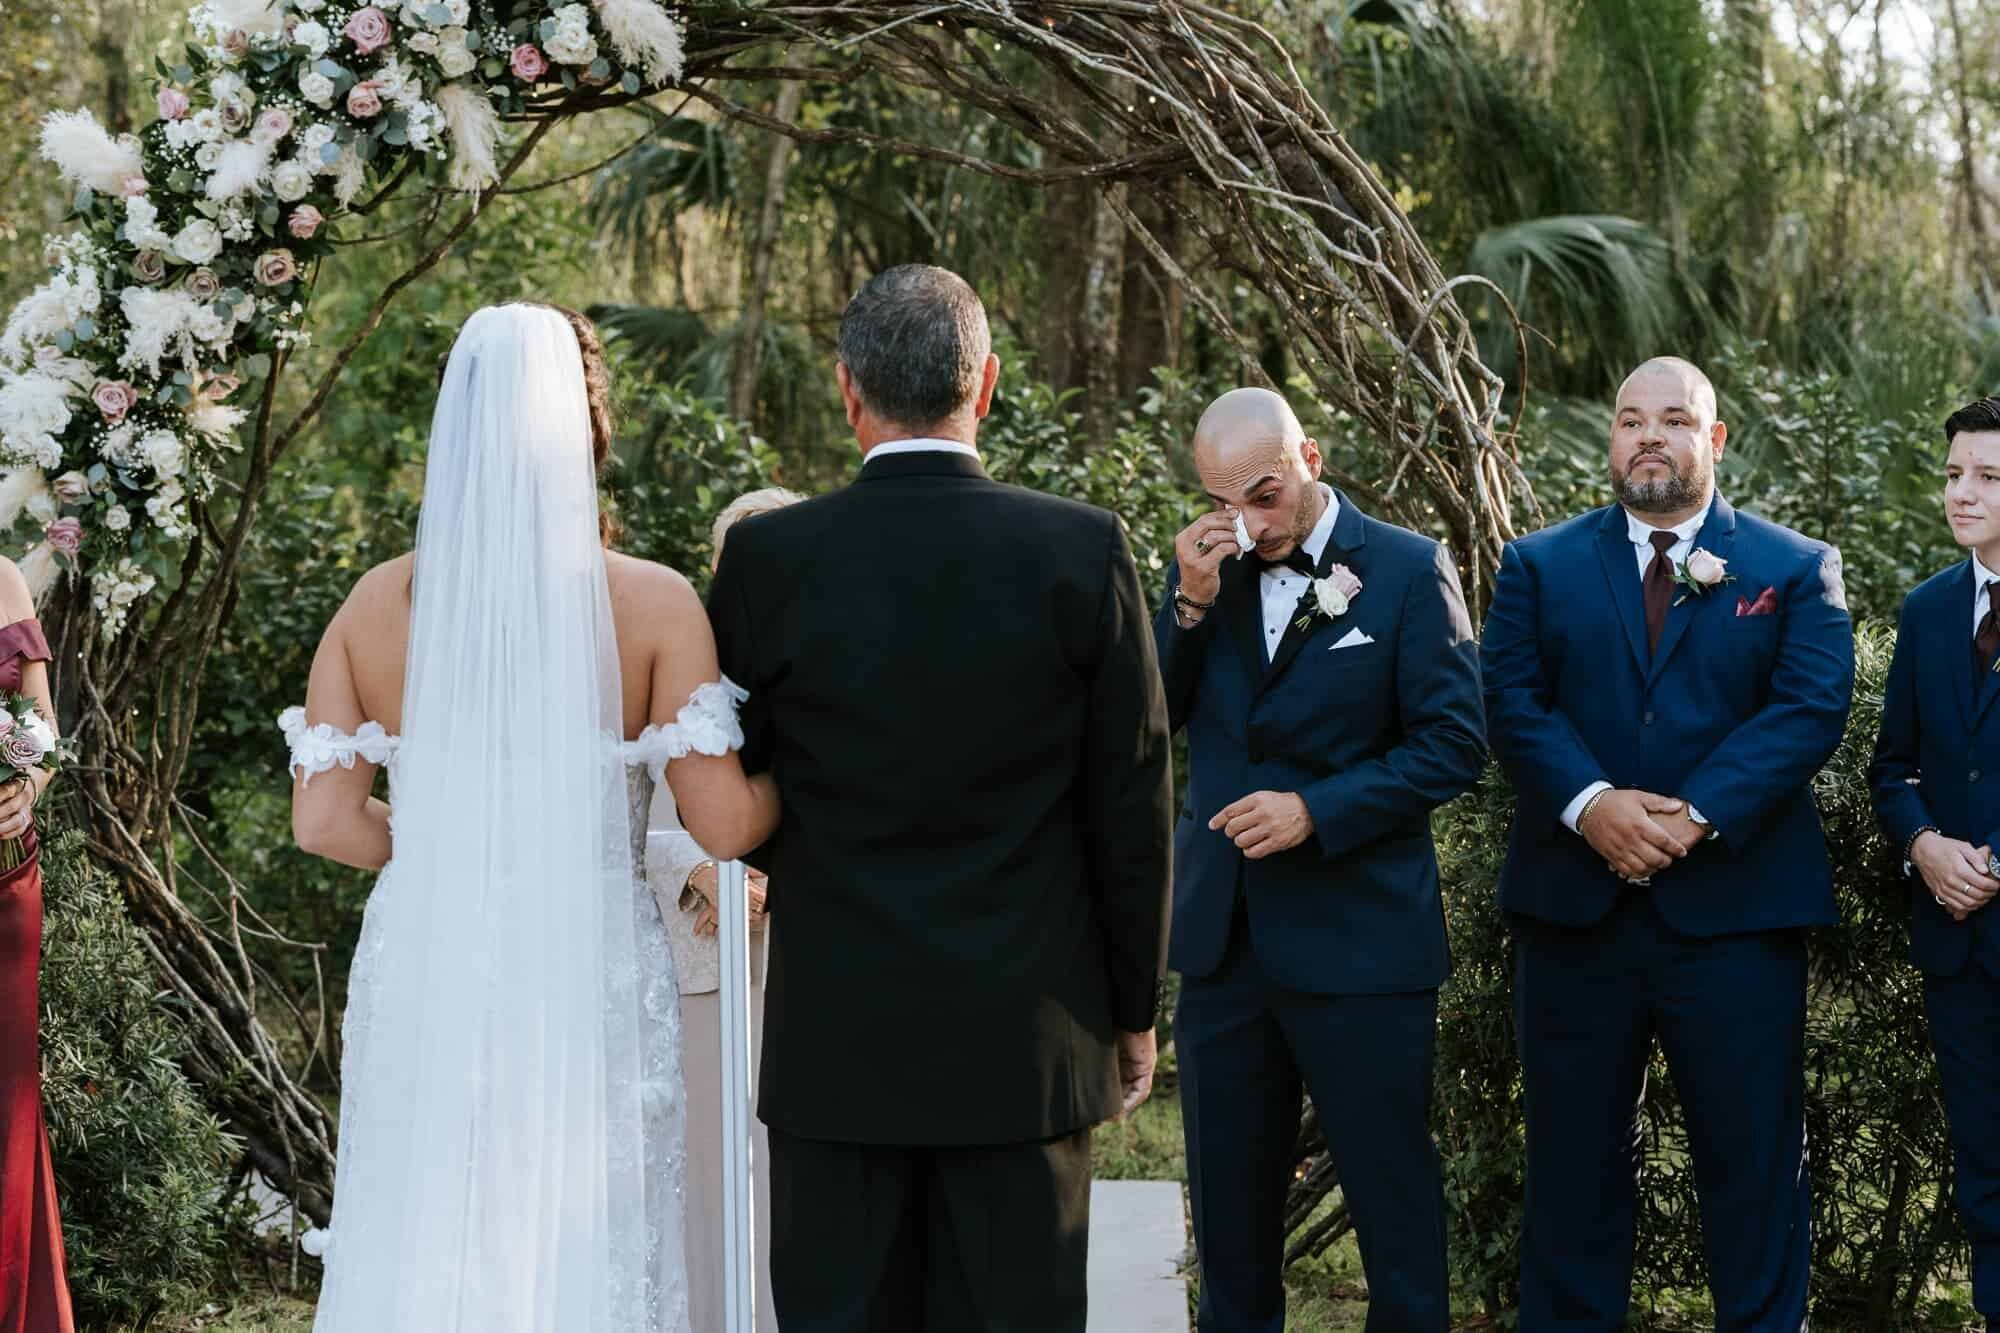 Groom wiping away tears at the wedding ceremony at a Tampa Wedding venue